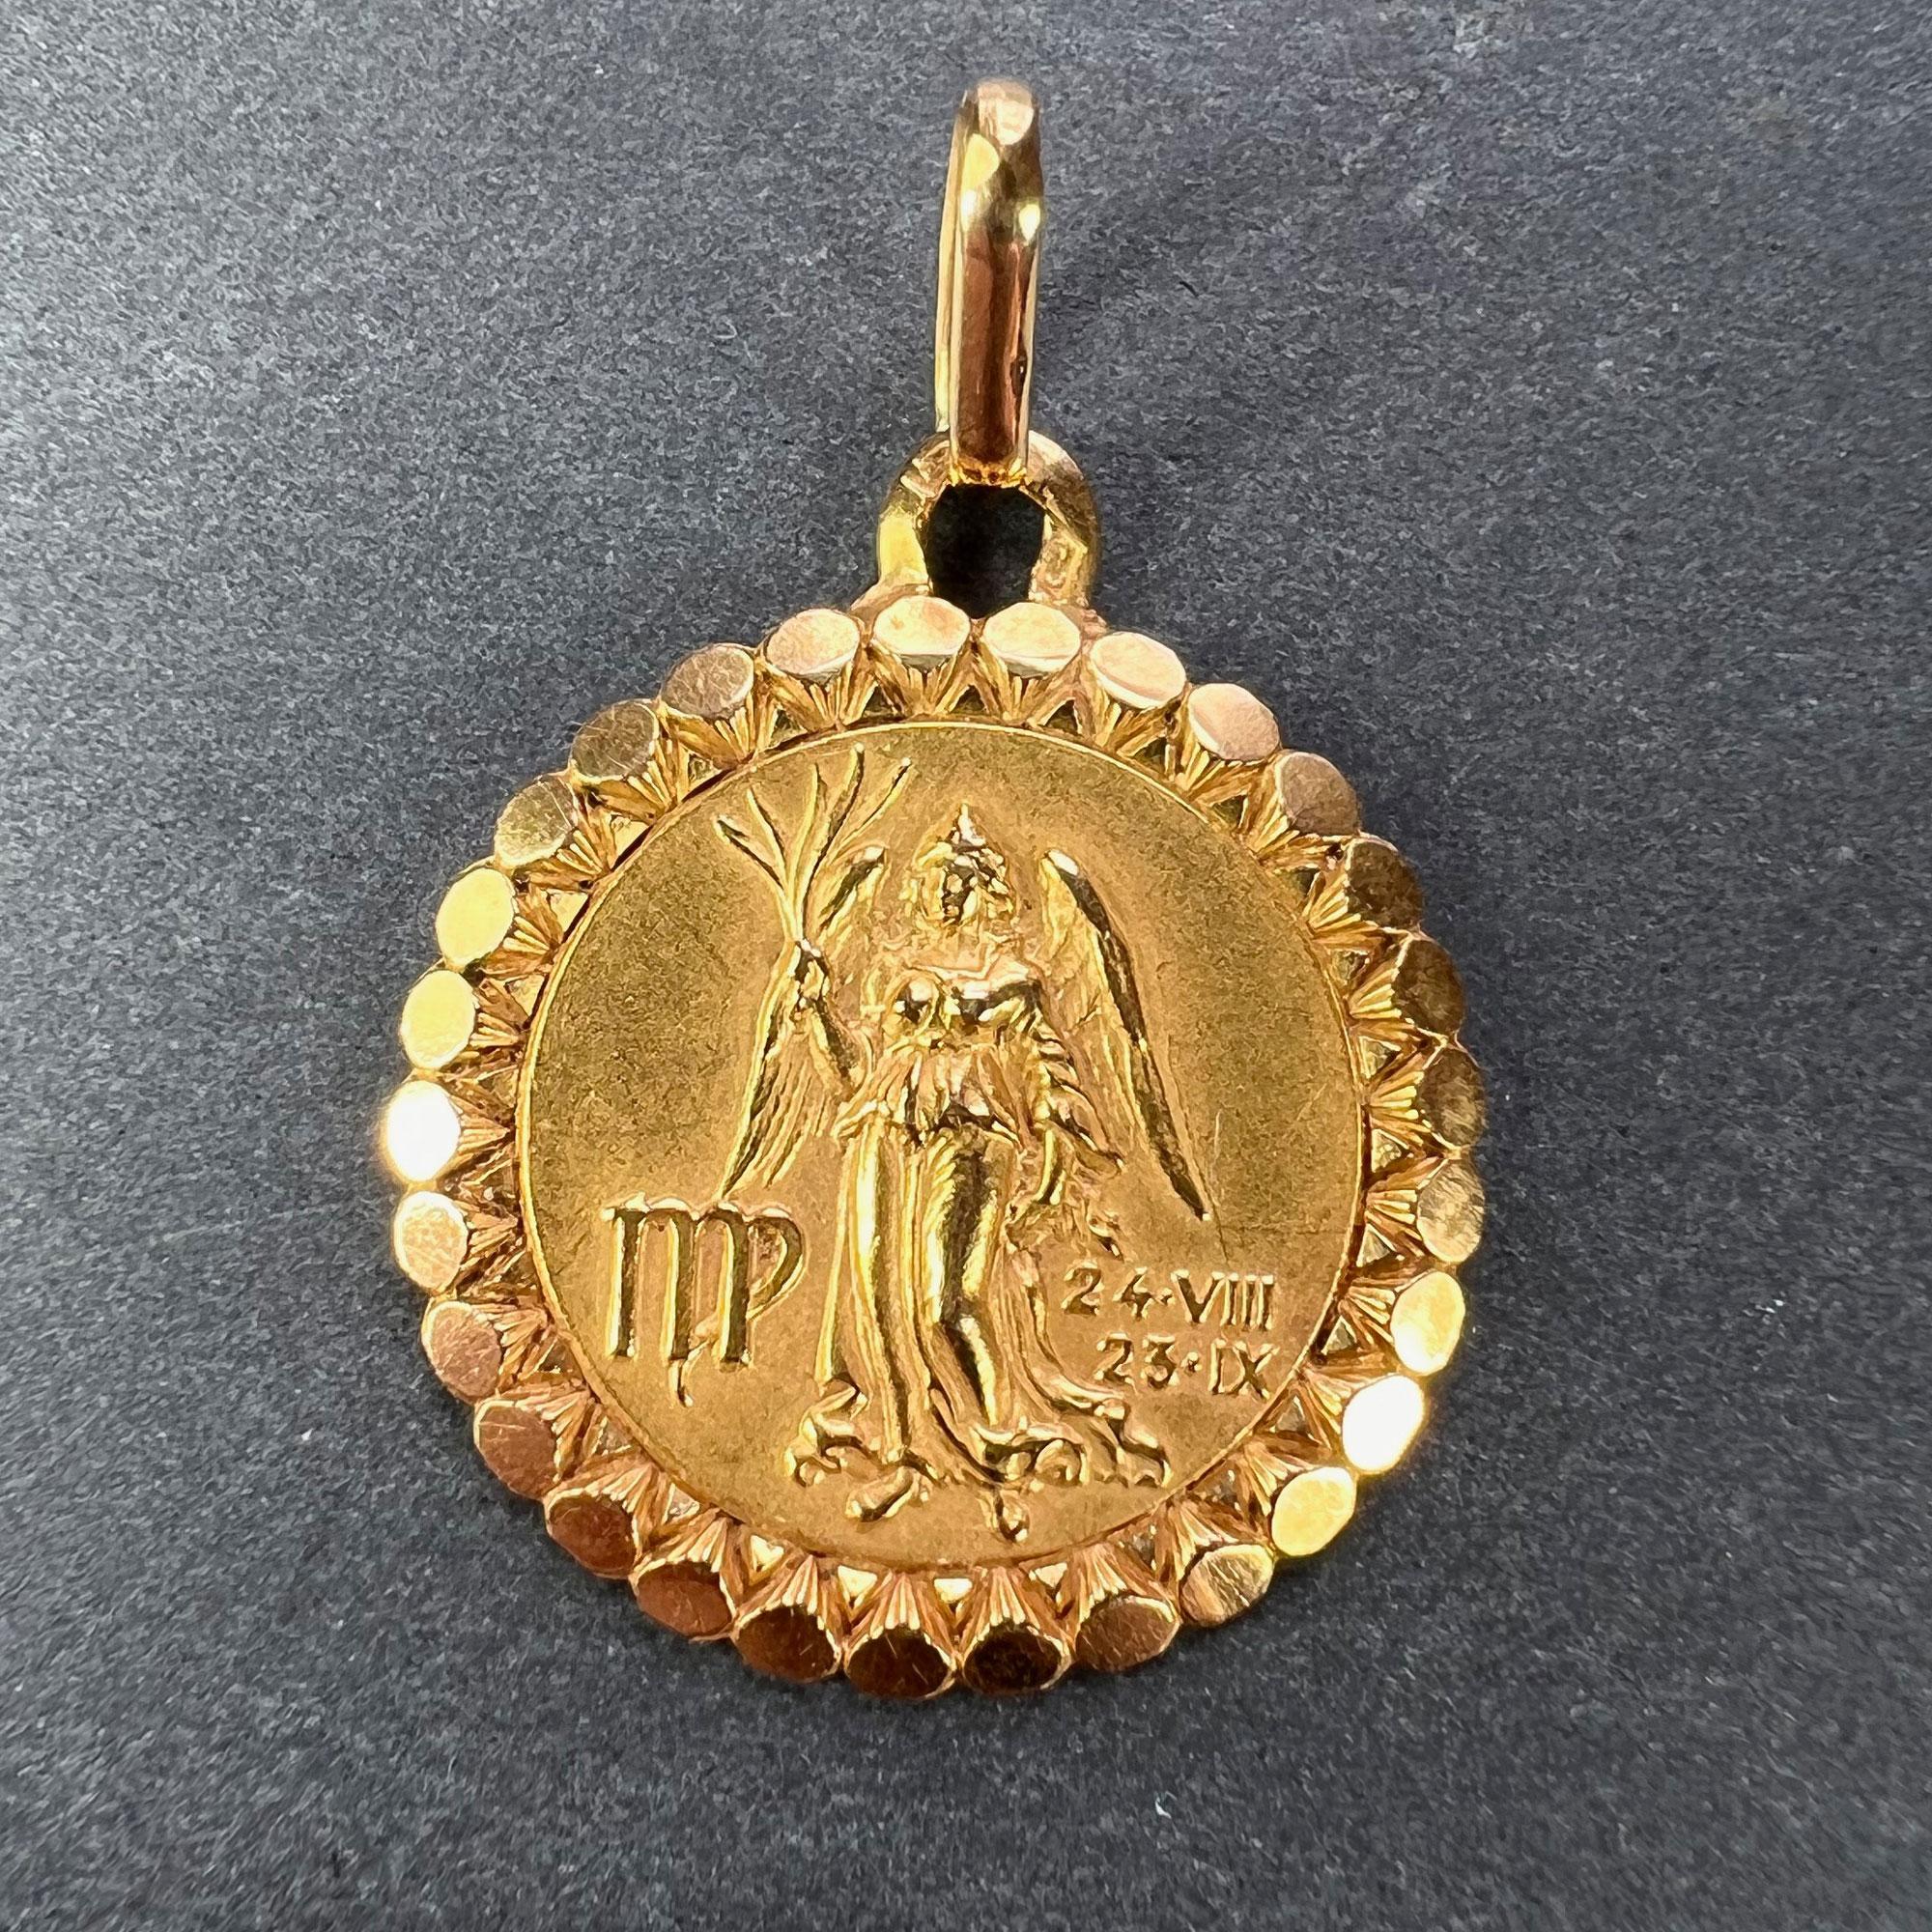 An 18 karat (18K) yellow gold charm pendant designed as the Zodiac sign of Virgo, depicting the virgin with the dates 24 VIII (August) and 23 IX (September). Stamped with the eagle mark for 18 karat gold and French manufacture with makers mark for